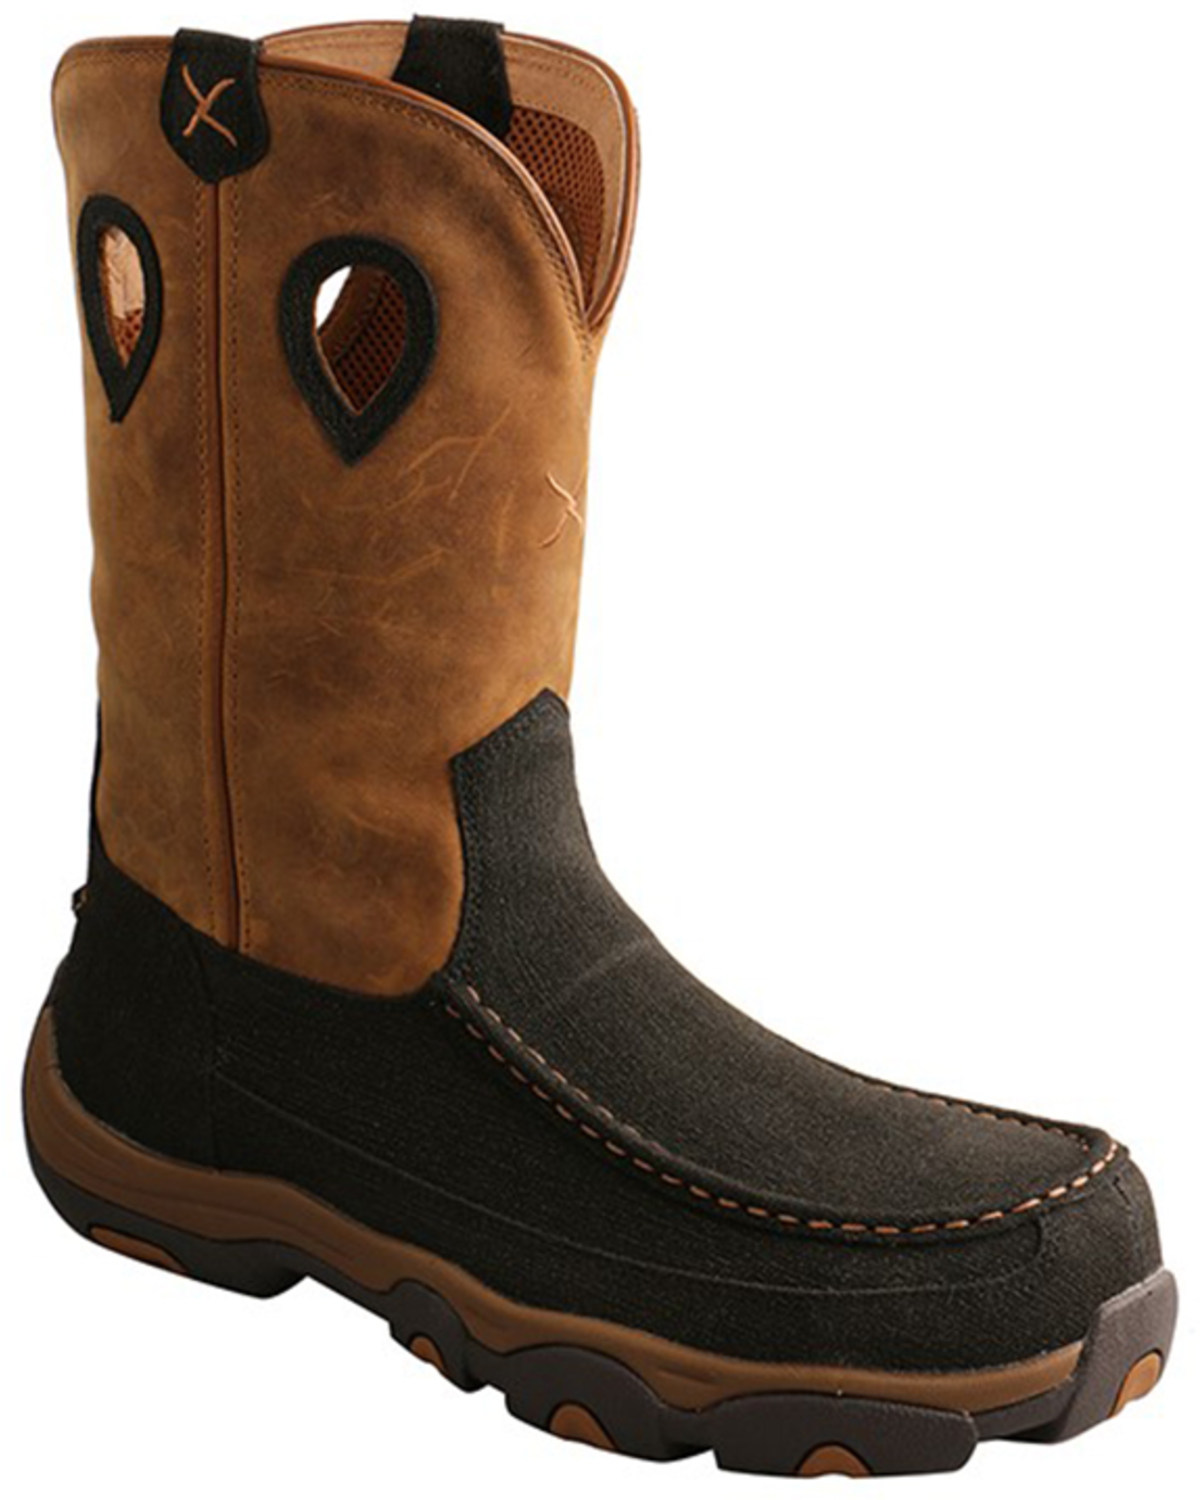 Twisted X Men's Pull On Work Boots - Nano Composite Toe